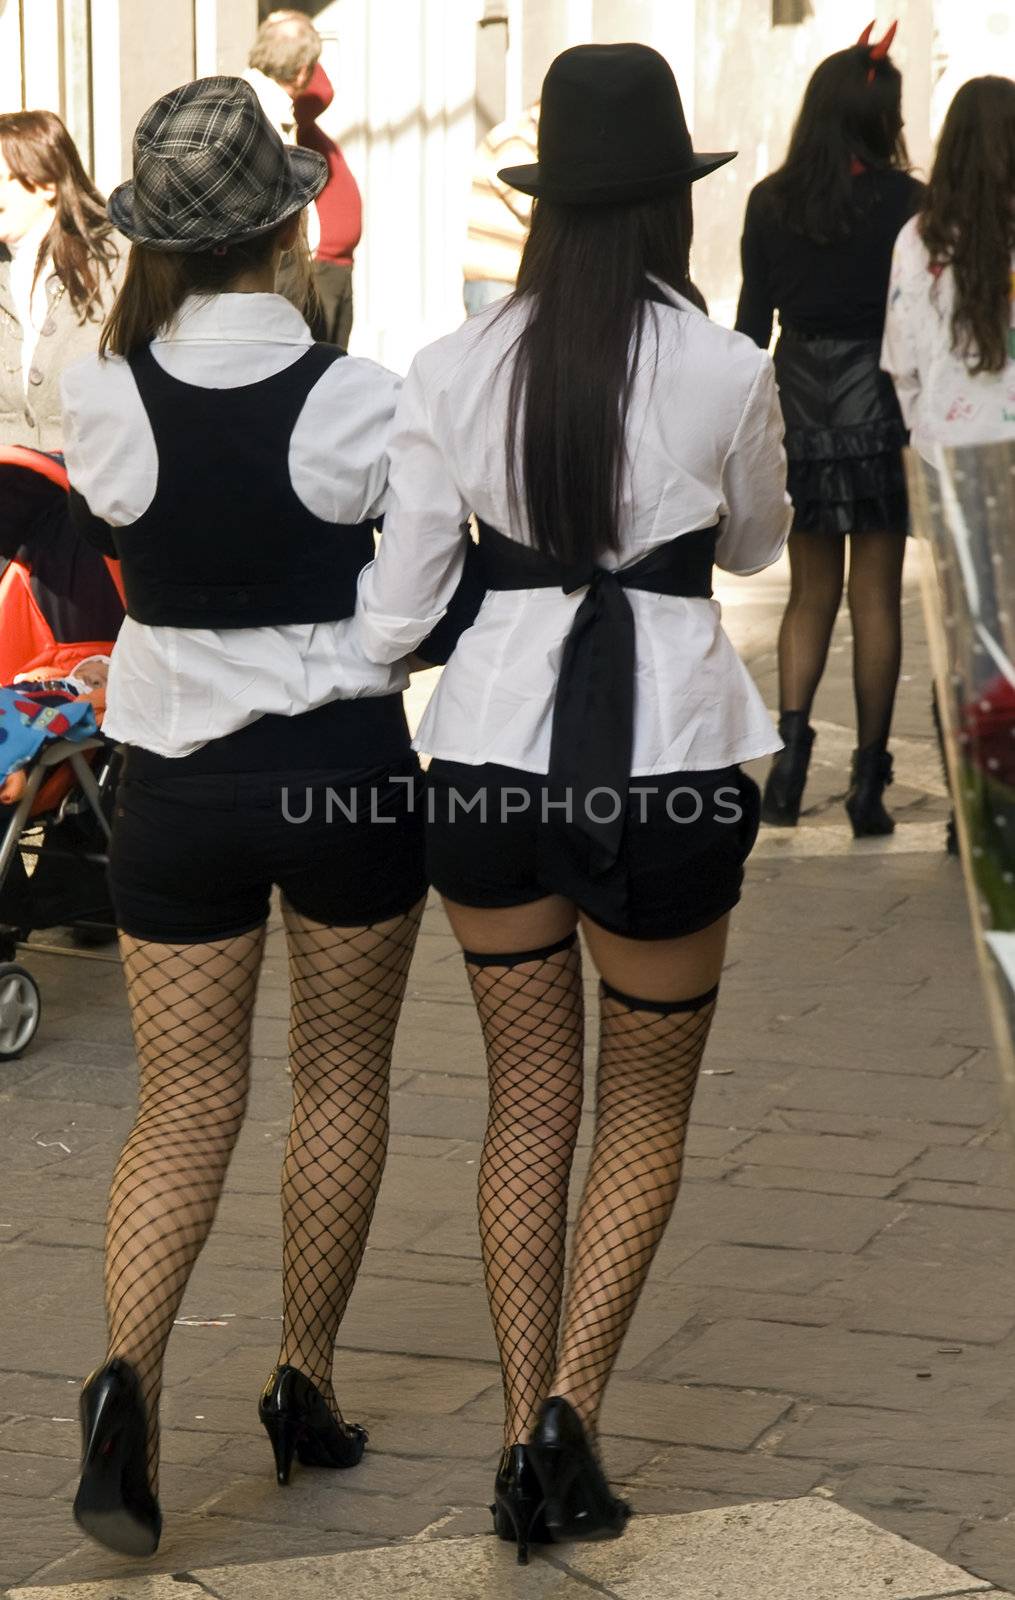 Two women walking in the street wearing sexy and provocative clothing